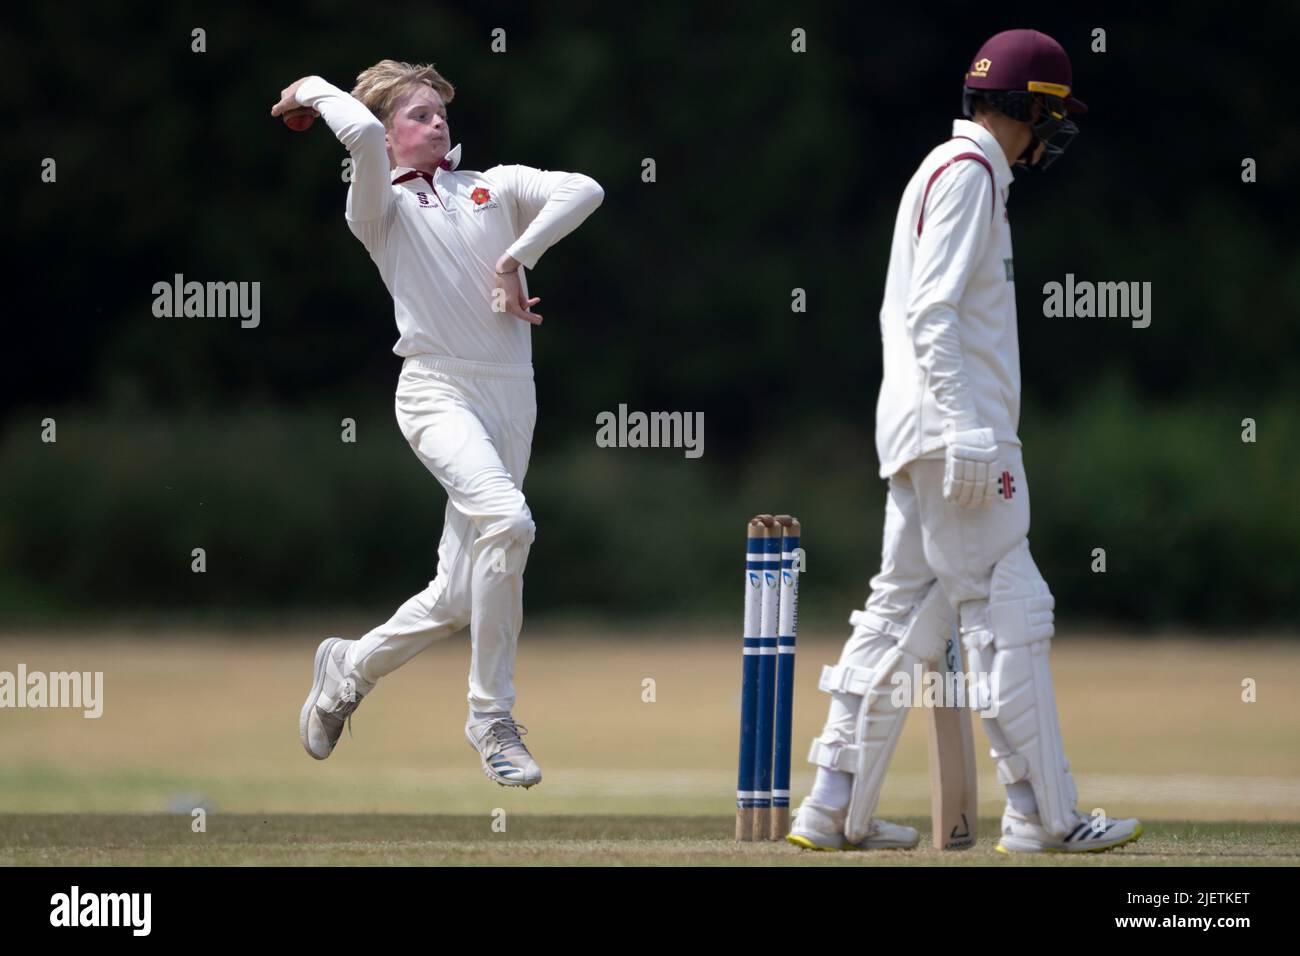 Teenage cricket bowler in action Stock Photo